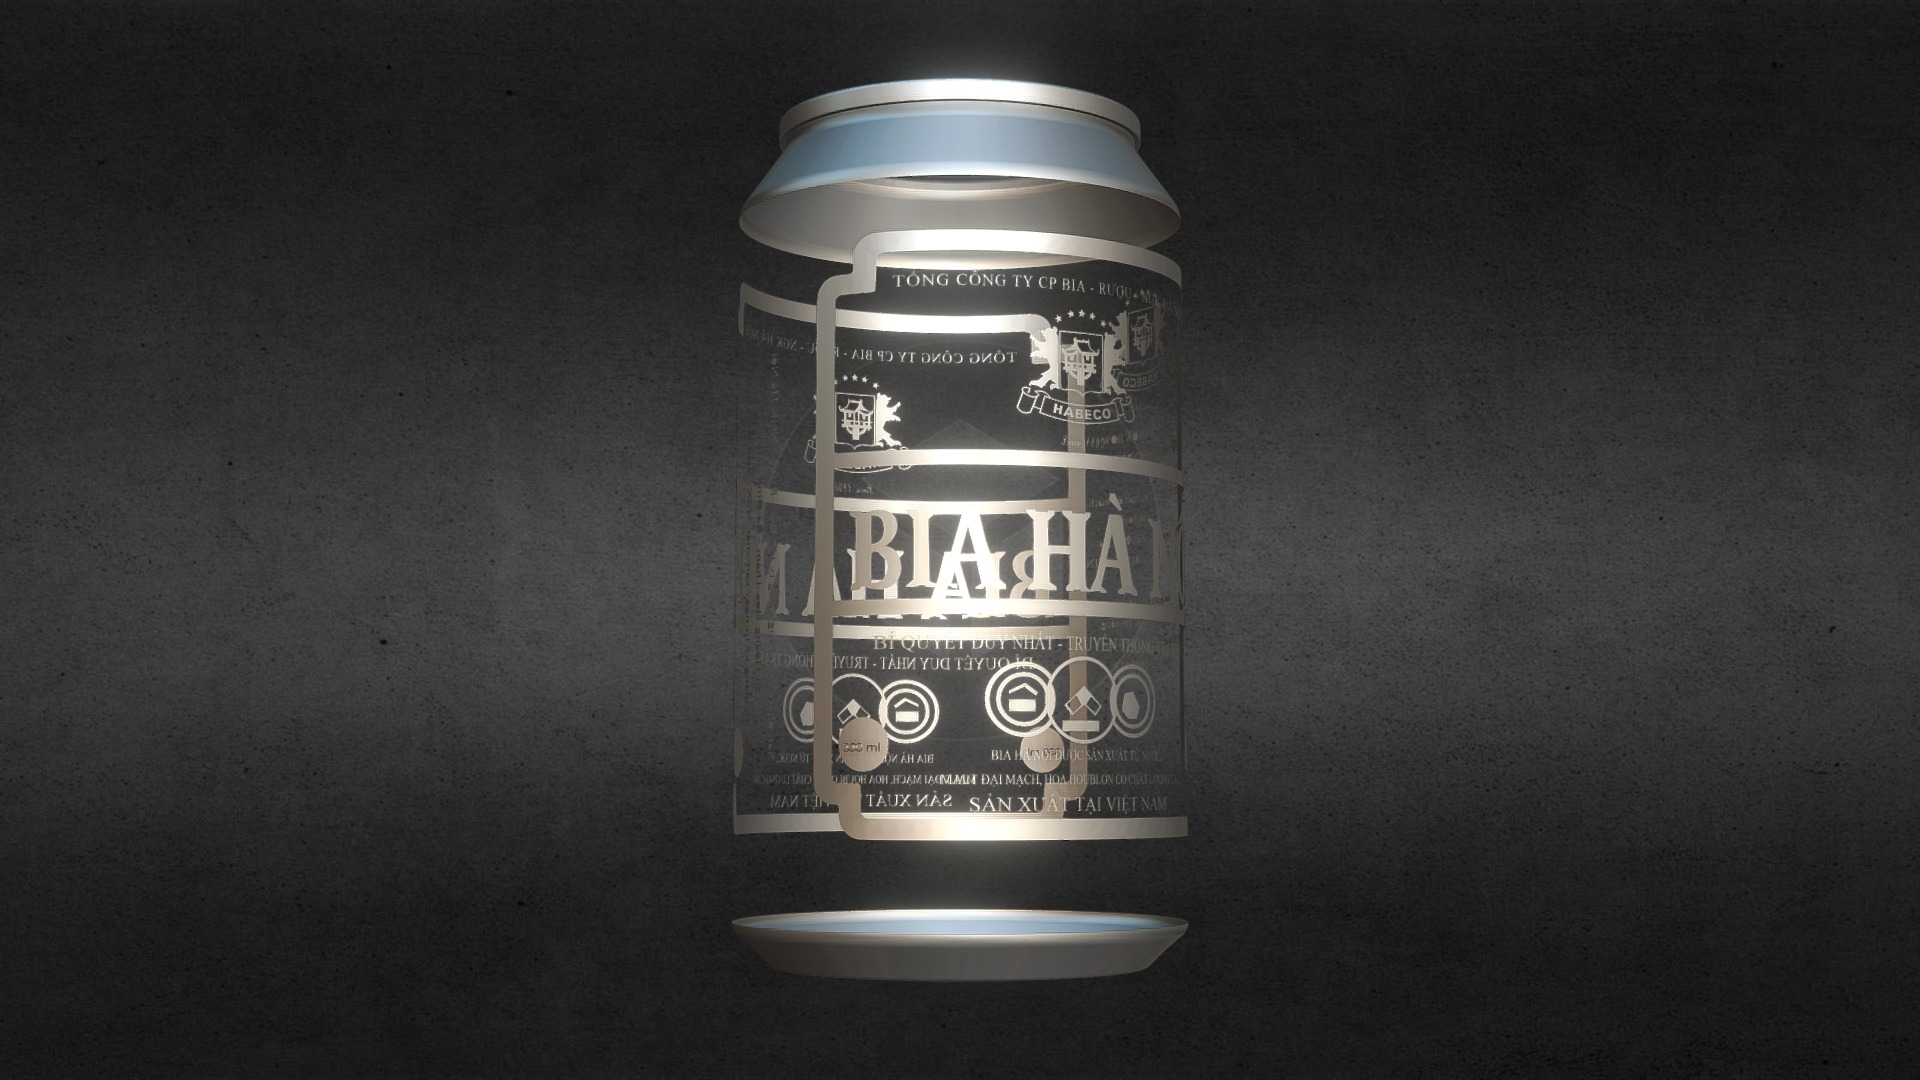 3D model Bản thiết kế 3D Lon Bia HÀ NỘI – 3D Beer can - This is a 3D model of the Bản thiết kế 3D Lon Bia HÀ NỘI - 3D Beer can. The 3D model is about a can of energy drink.